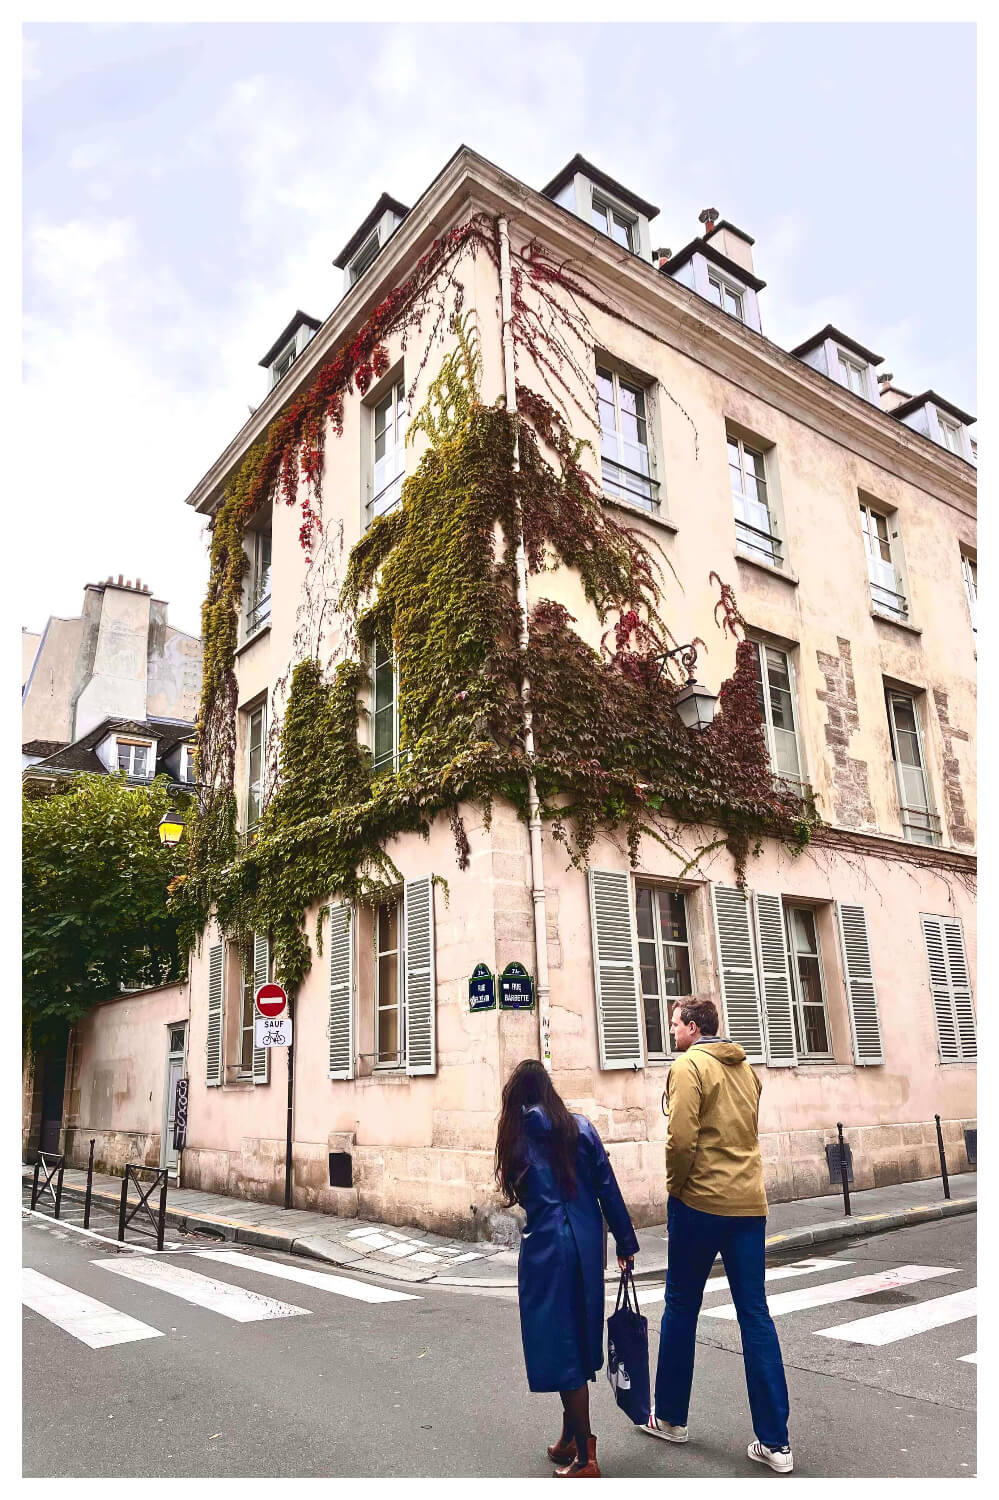 a building from le marais, paris is clearly visible. there is a couple walking on the street. the woman has a blue coloured trench coat and the man is wearing a beige jacket.